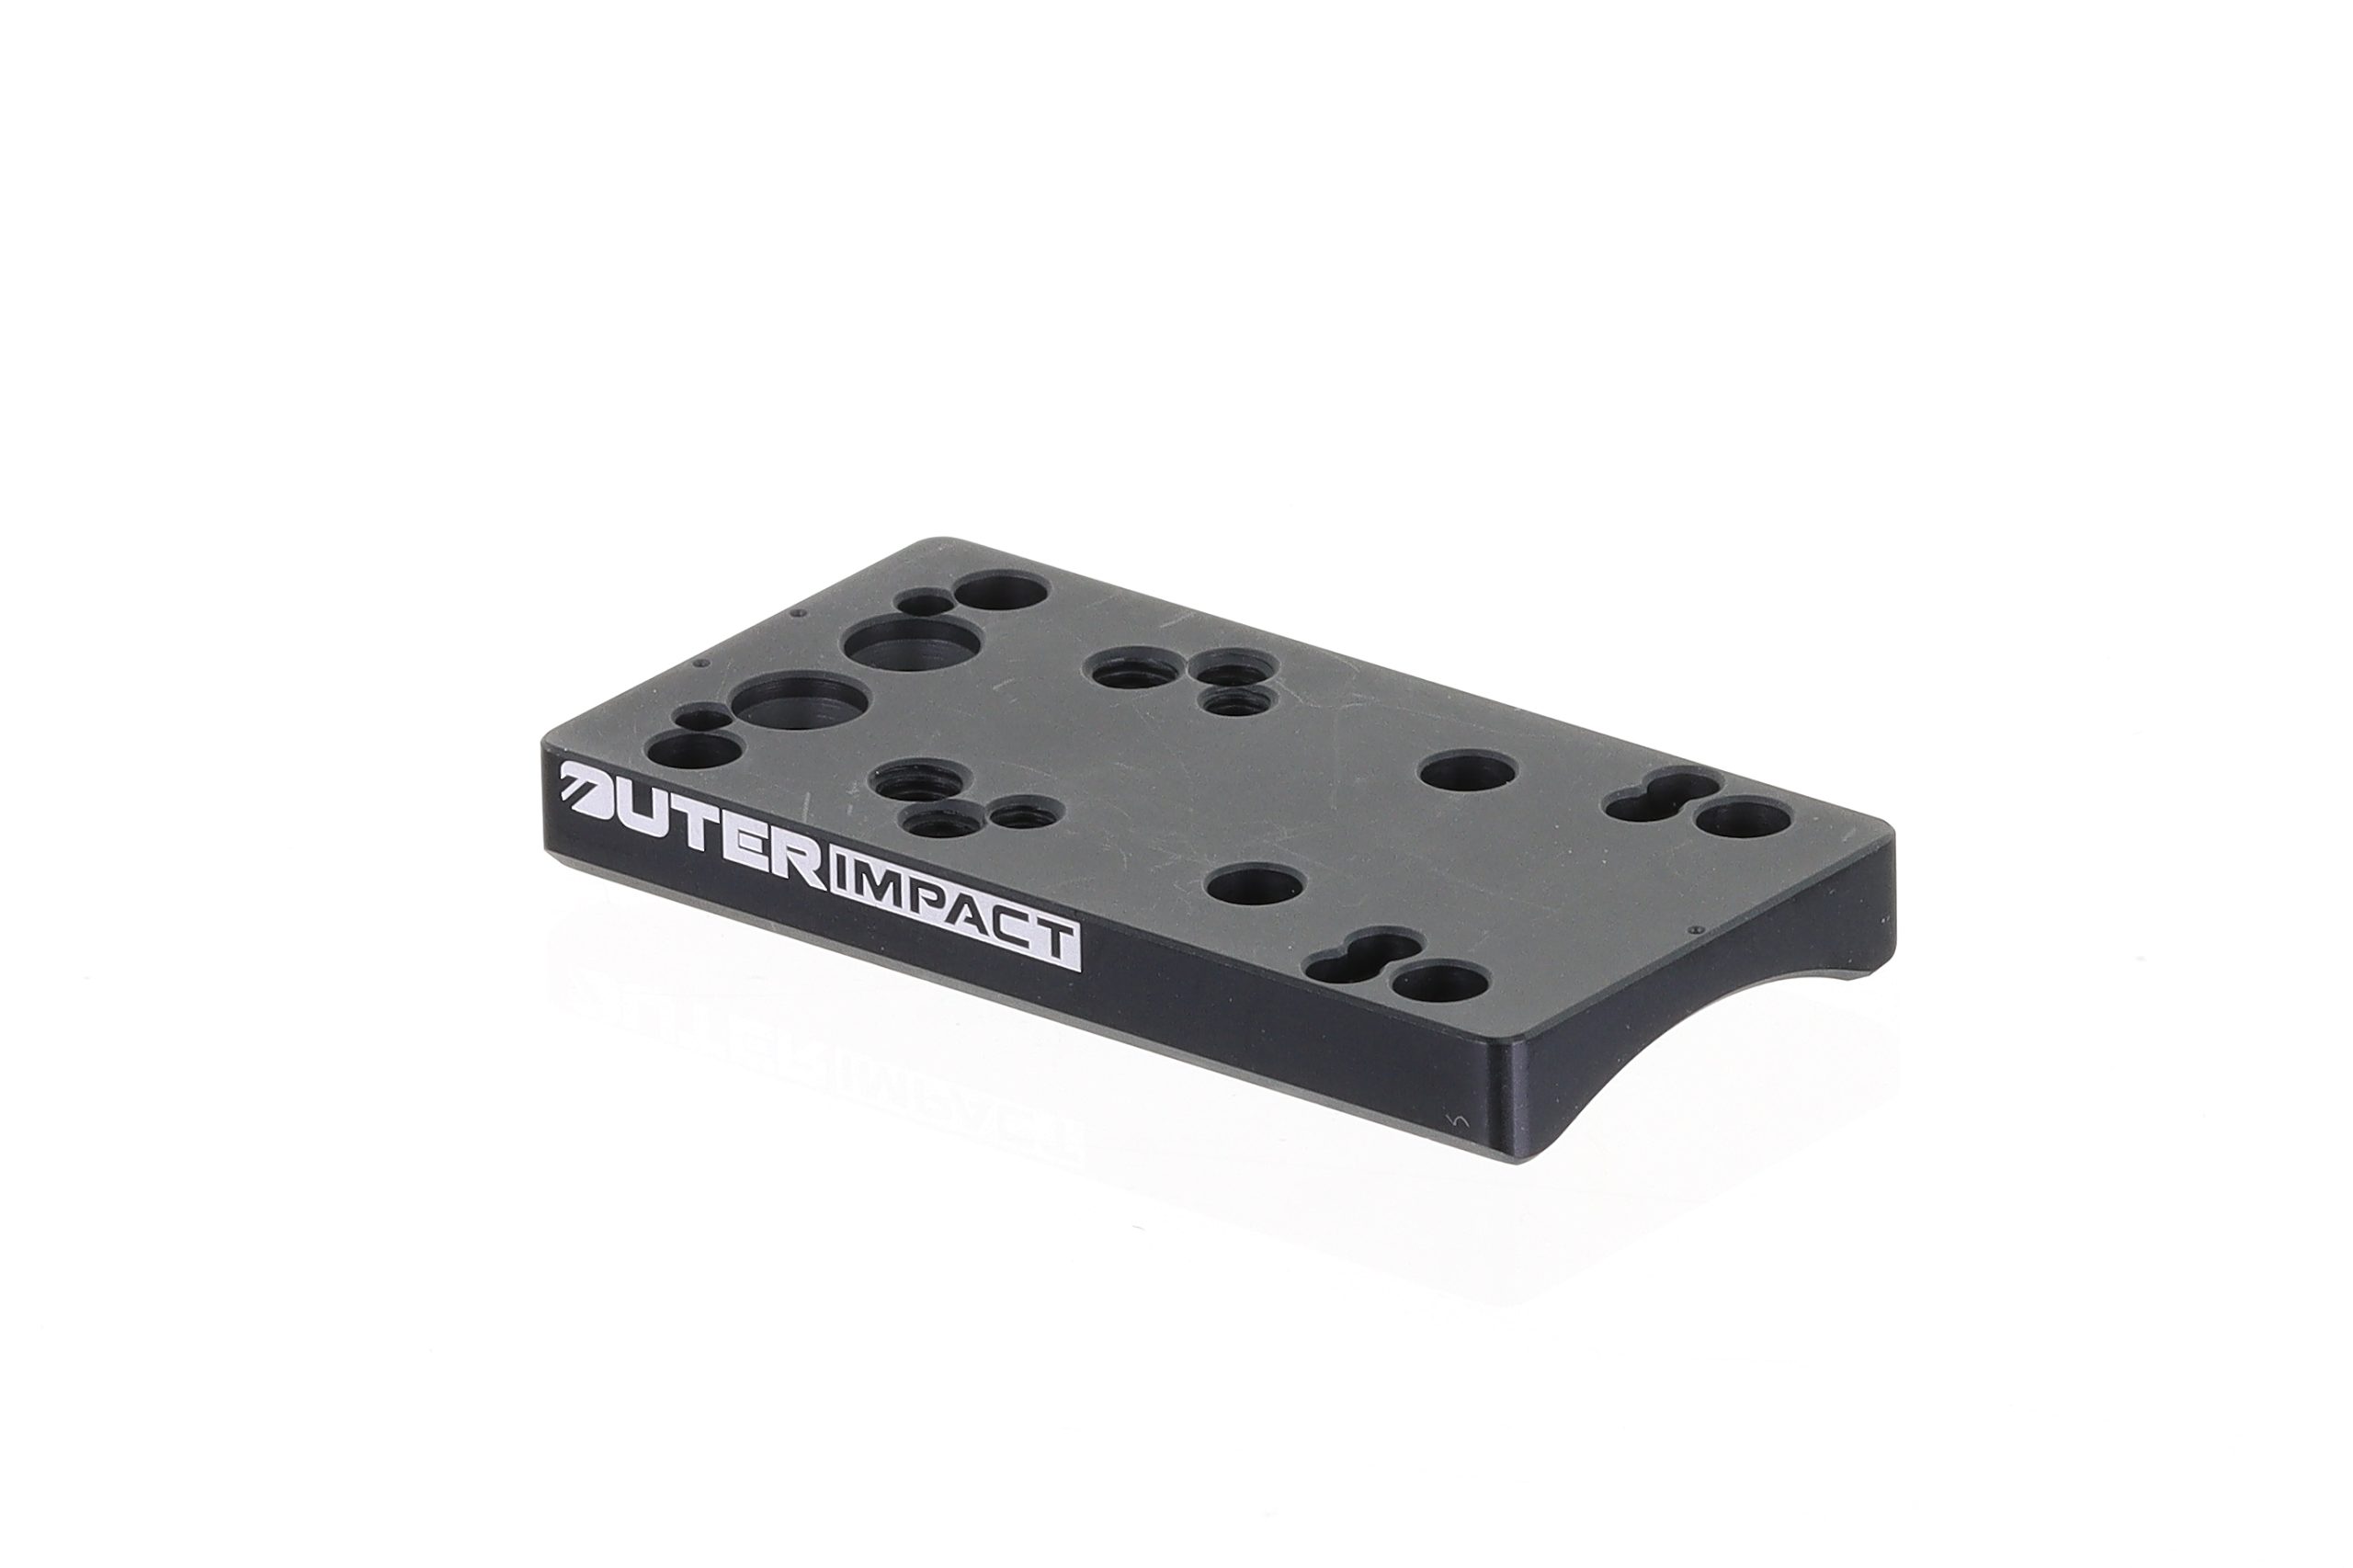 Sig Sauer P226, P220, P227, P229 Pistols Red Dot Adapter Mount Plate - OuterImpact